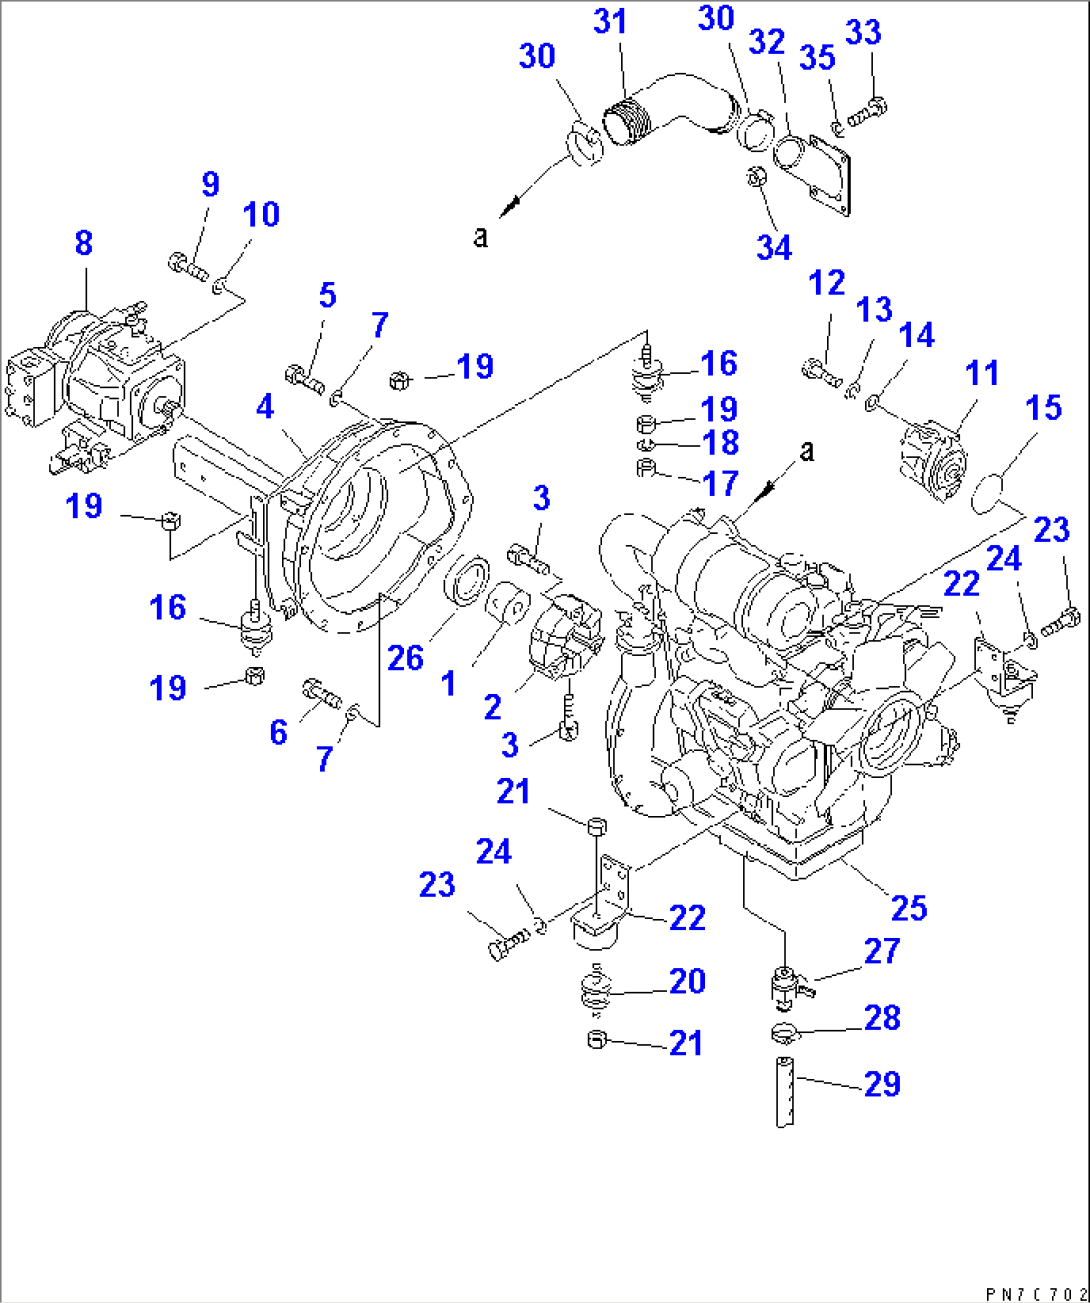 ENGINE AND PUMP MOUNTING PARTS(#1322-)